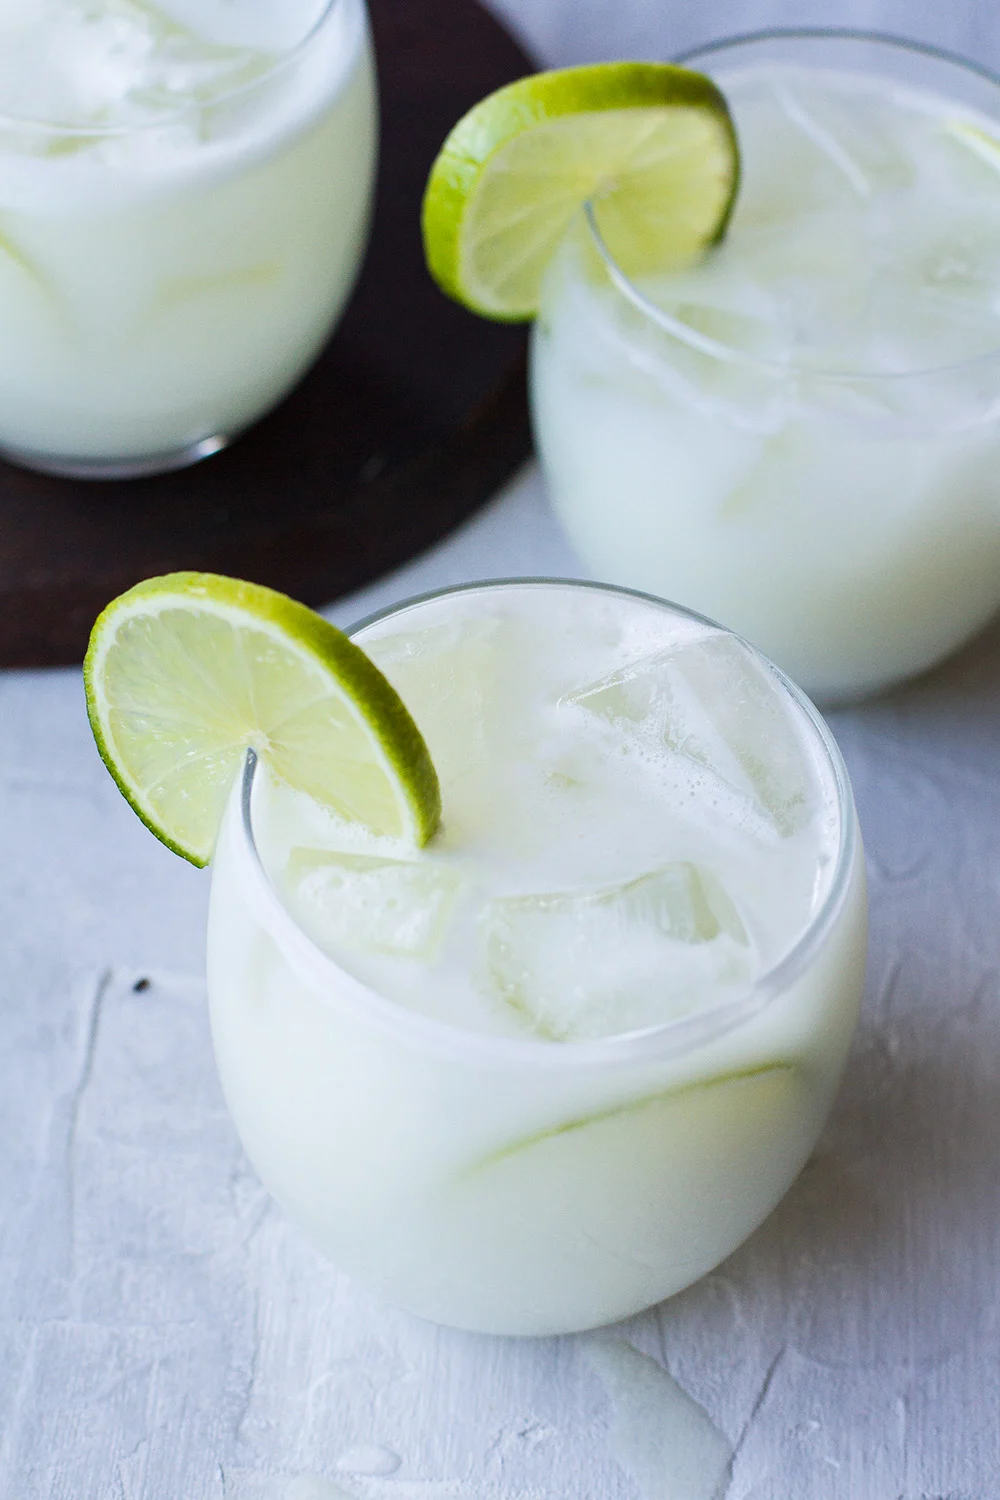 Close-up of a glass filled with ice and Brazilian lemonade, garnished with lime.